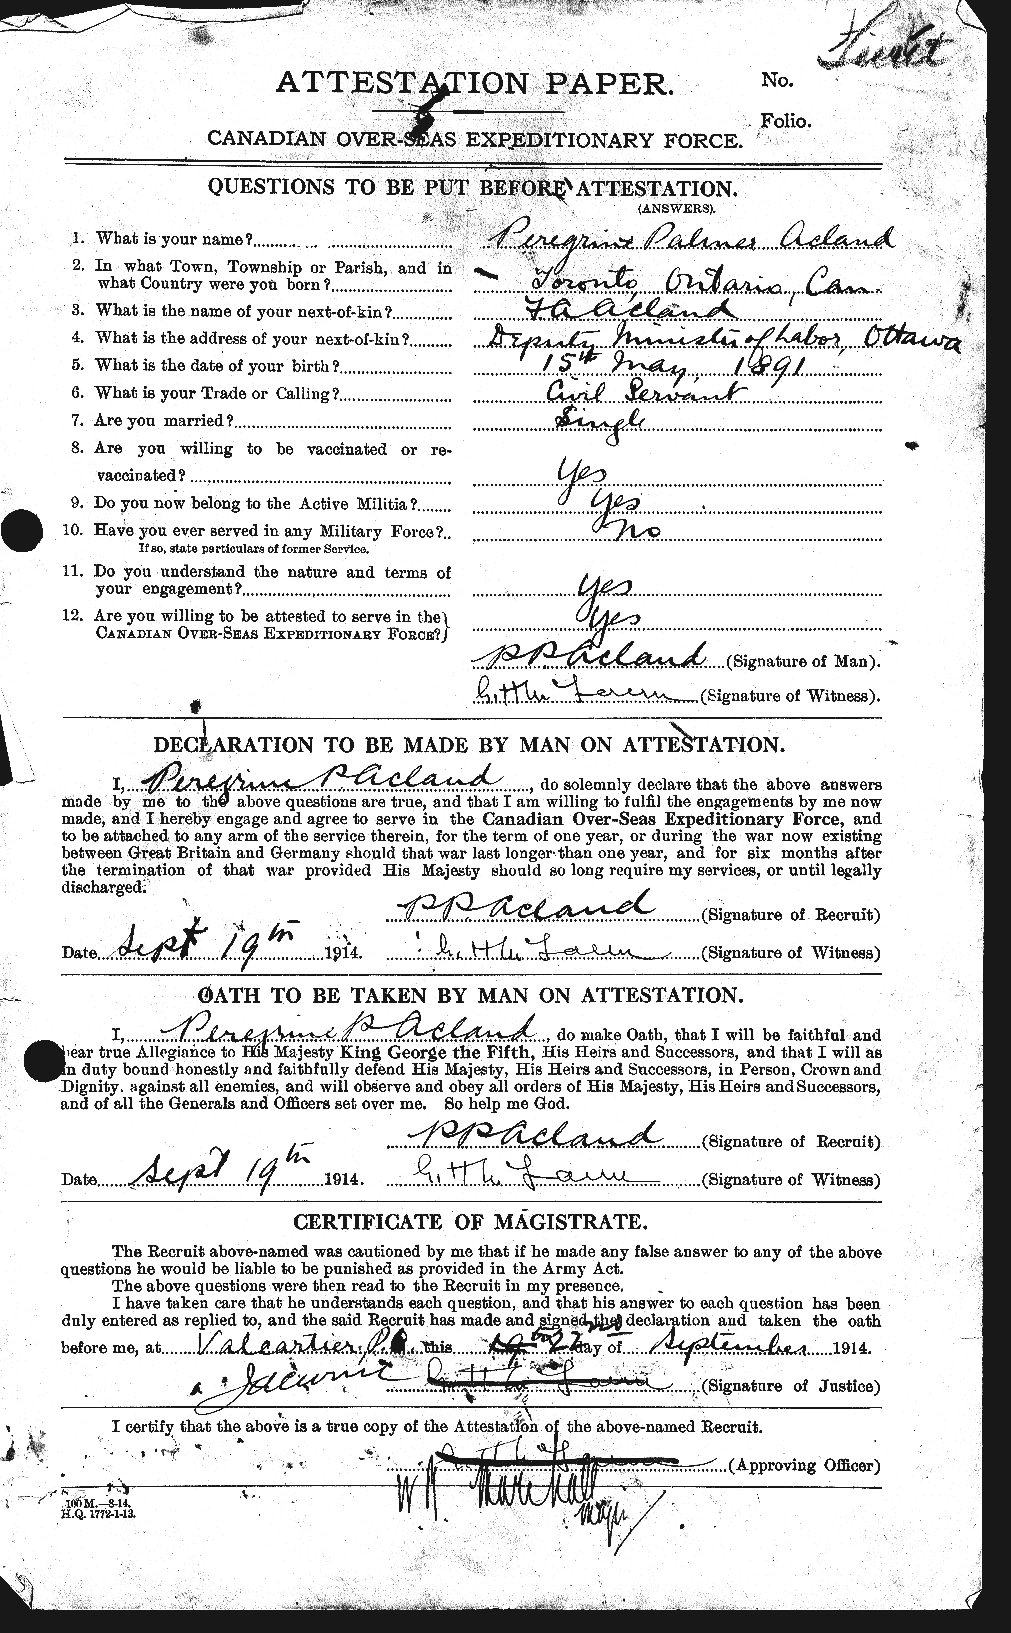 Personnel Records of the First World War - CEF 200727a